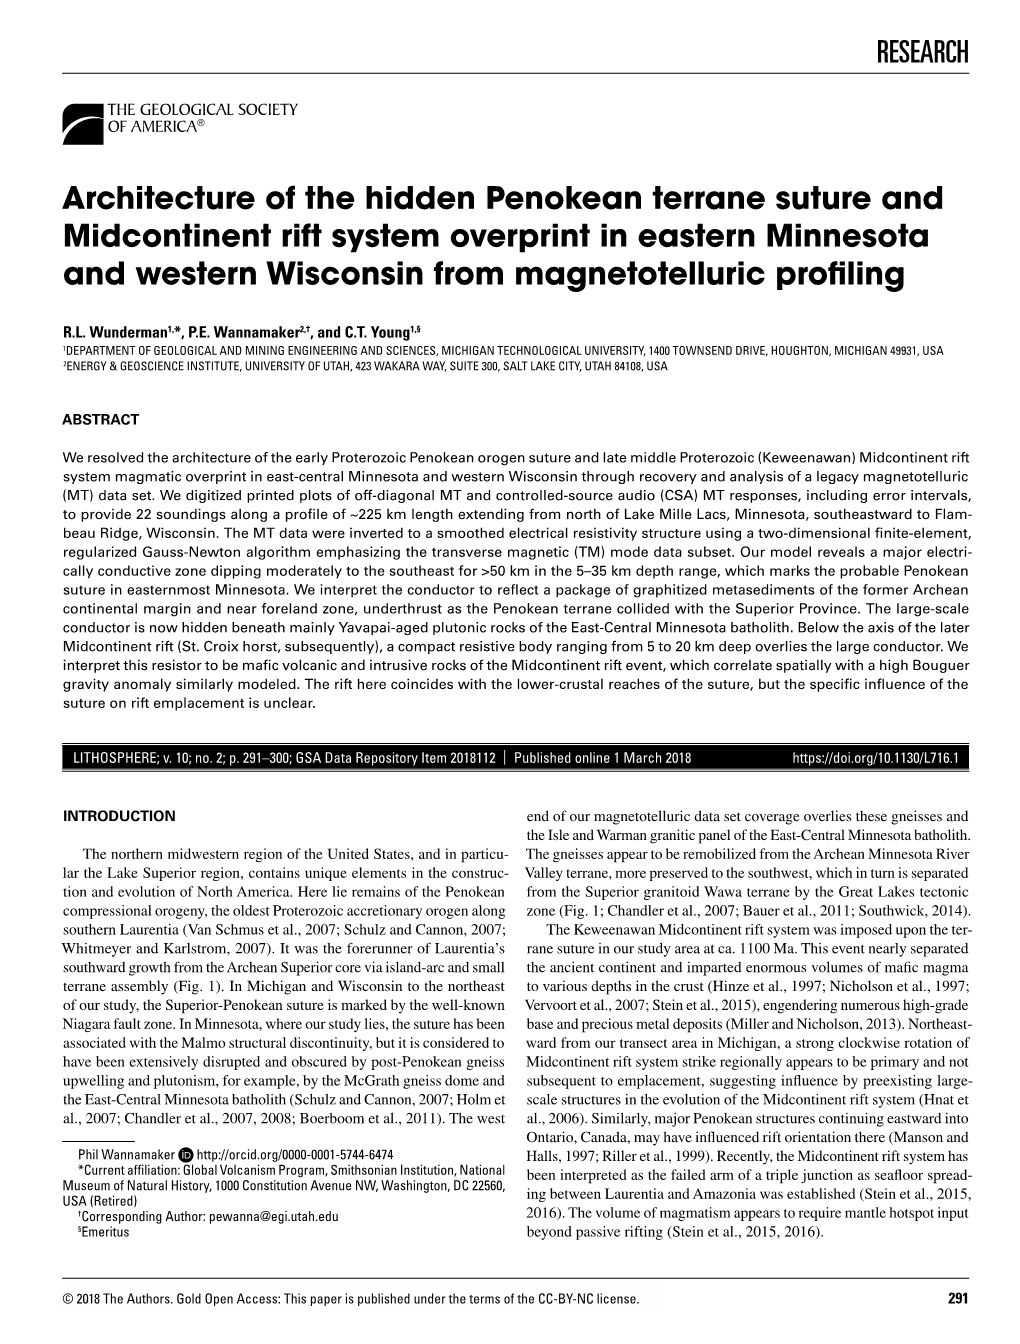 Architecture of the Hidden Penokean Terrane Suture and Midcontinent Rift System Overprint in Eastern Minnesota and Western Wisconsin from Magnetotelluric Profiling